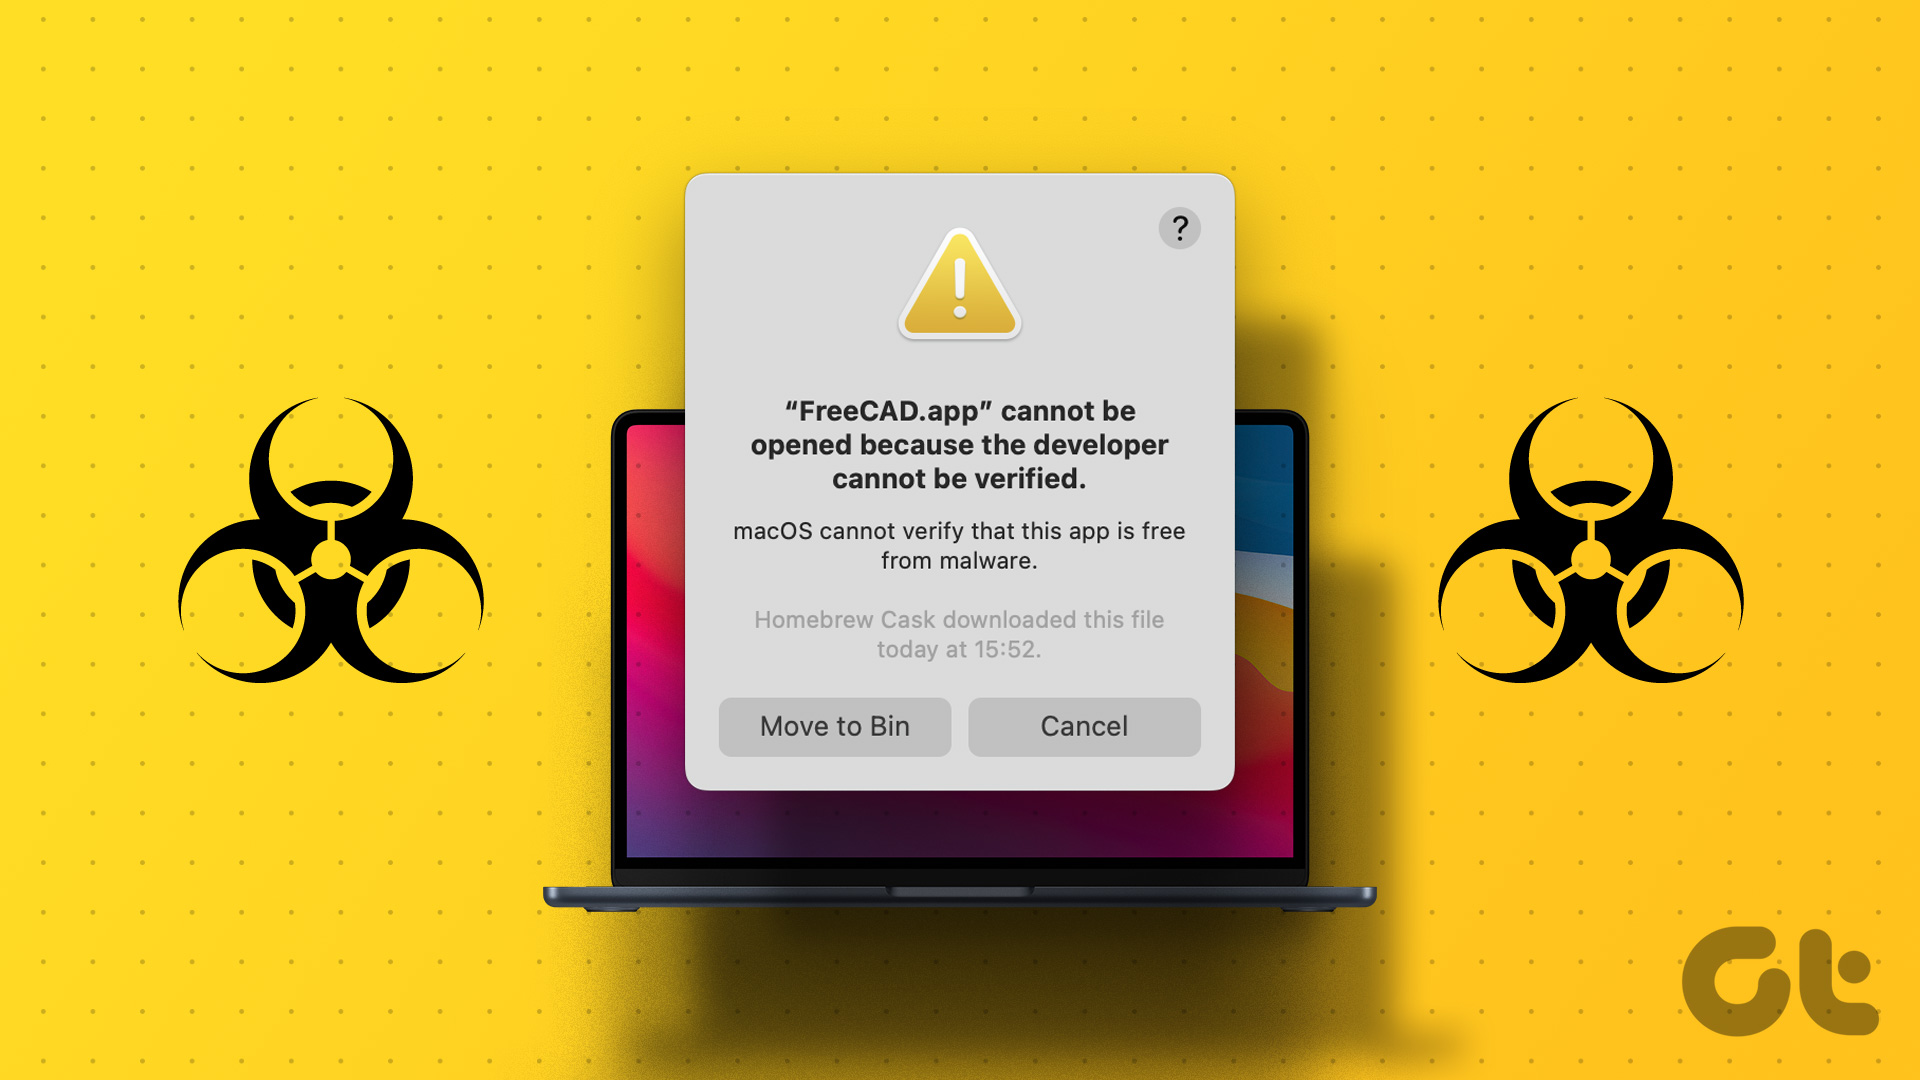 Fix macOS Cannot Verify That This App Is Free From Malware